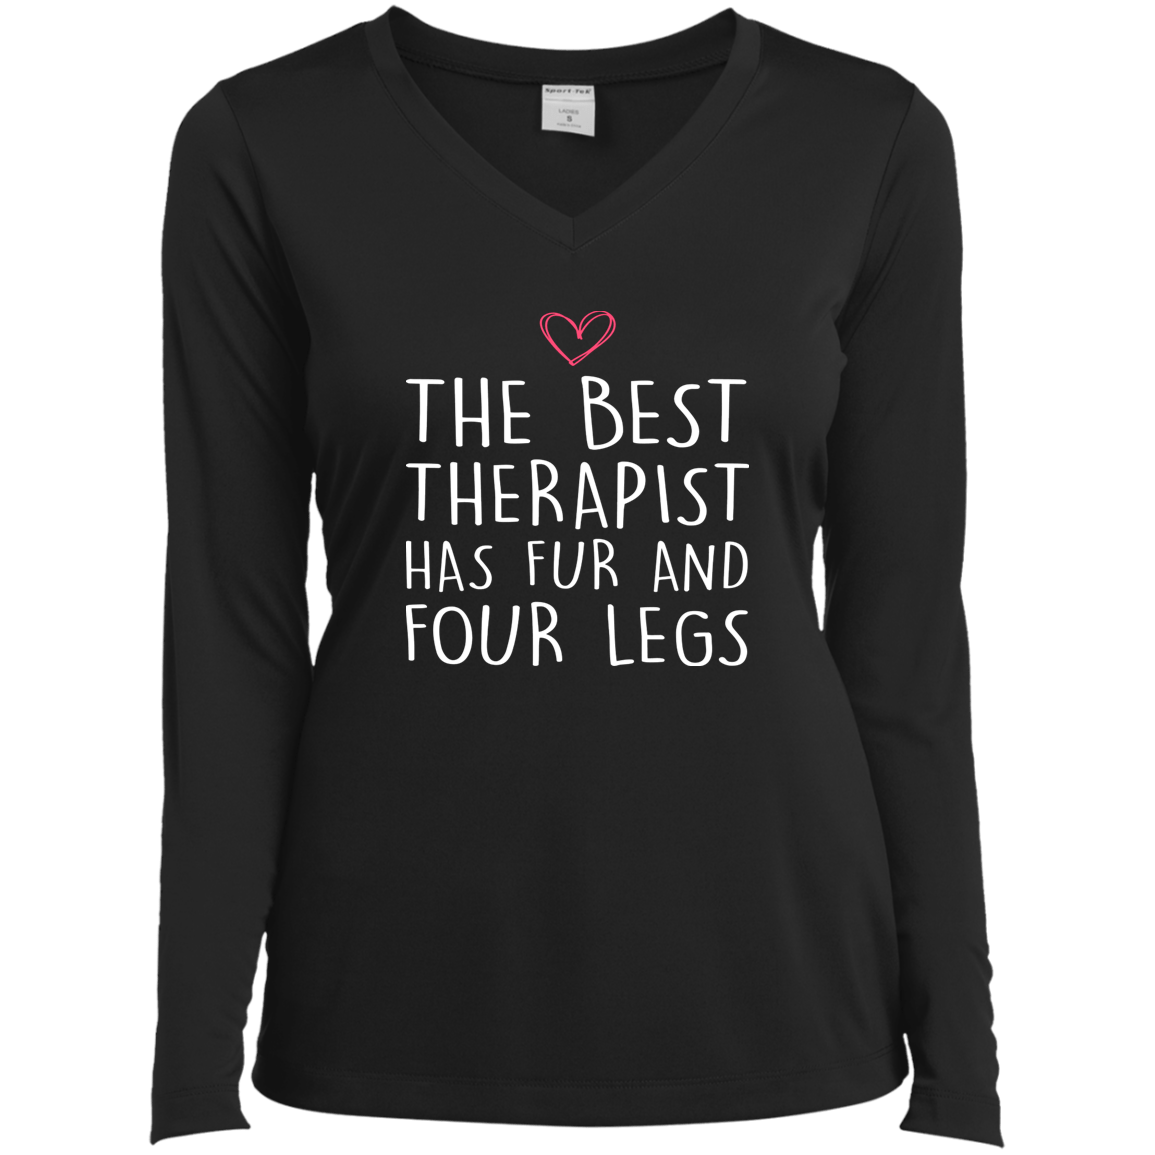 The Best Therapist - Long Sleeve Ladies V Neck.